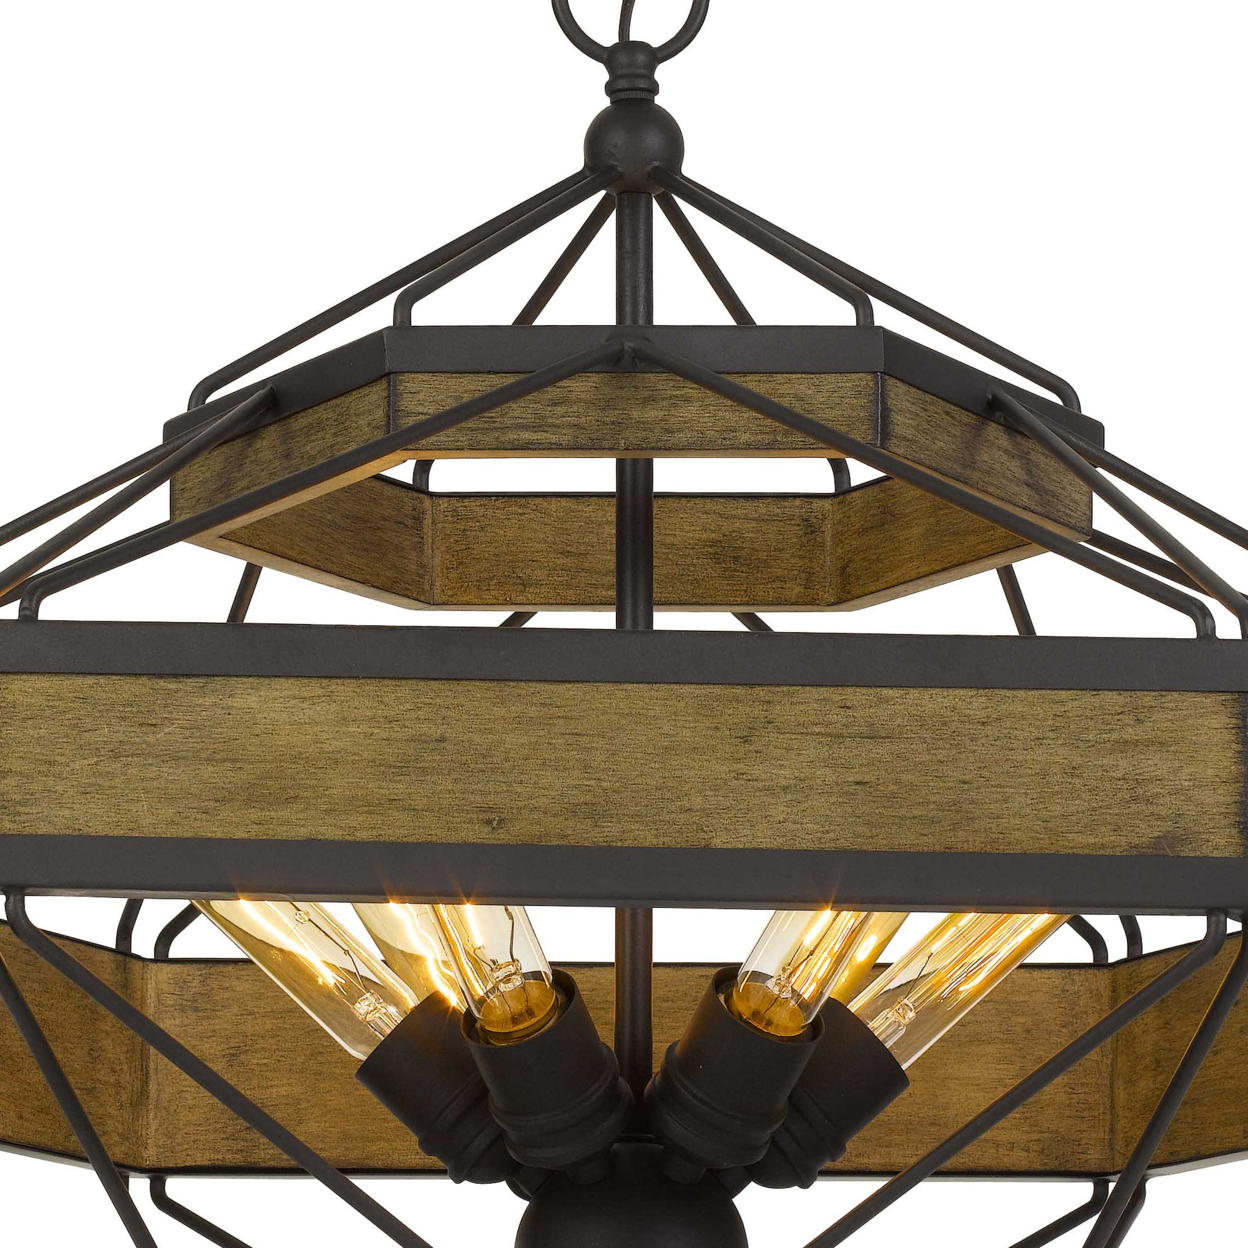 6 Bulb Chandelier With Hexagonal Metal And Wooden Frame, Brown And Bronze- Saltoro Sherpi